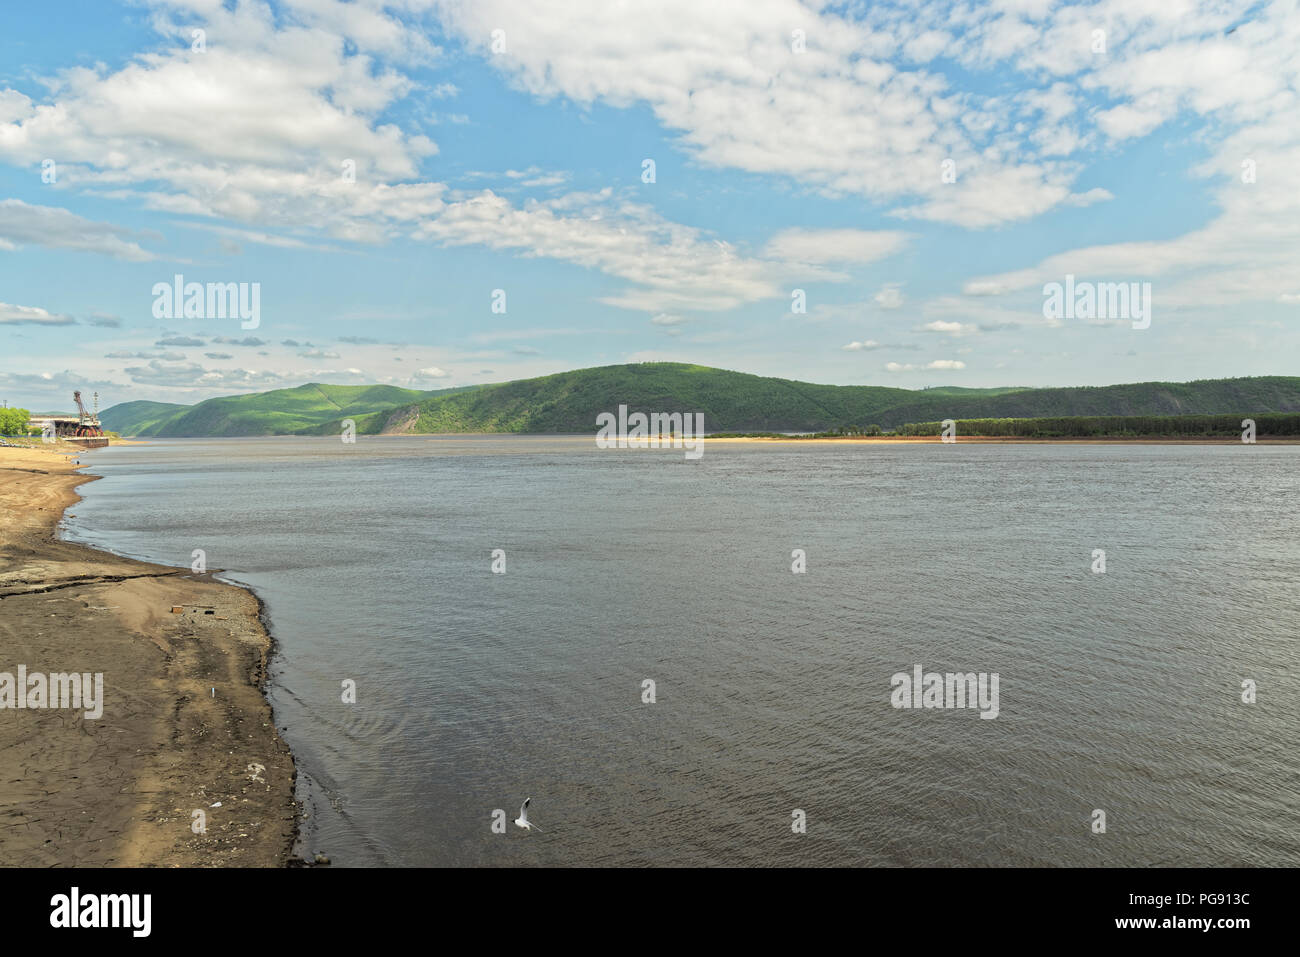 Panoramic view of Amur river against amazing cloudy sky. Komsomolsk-on-Amur, Russia Stock Photo